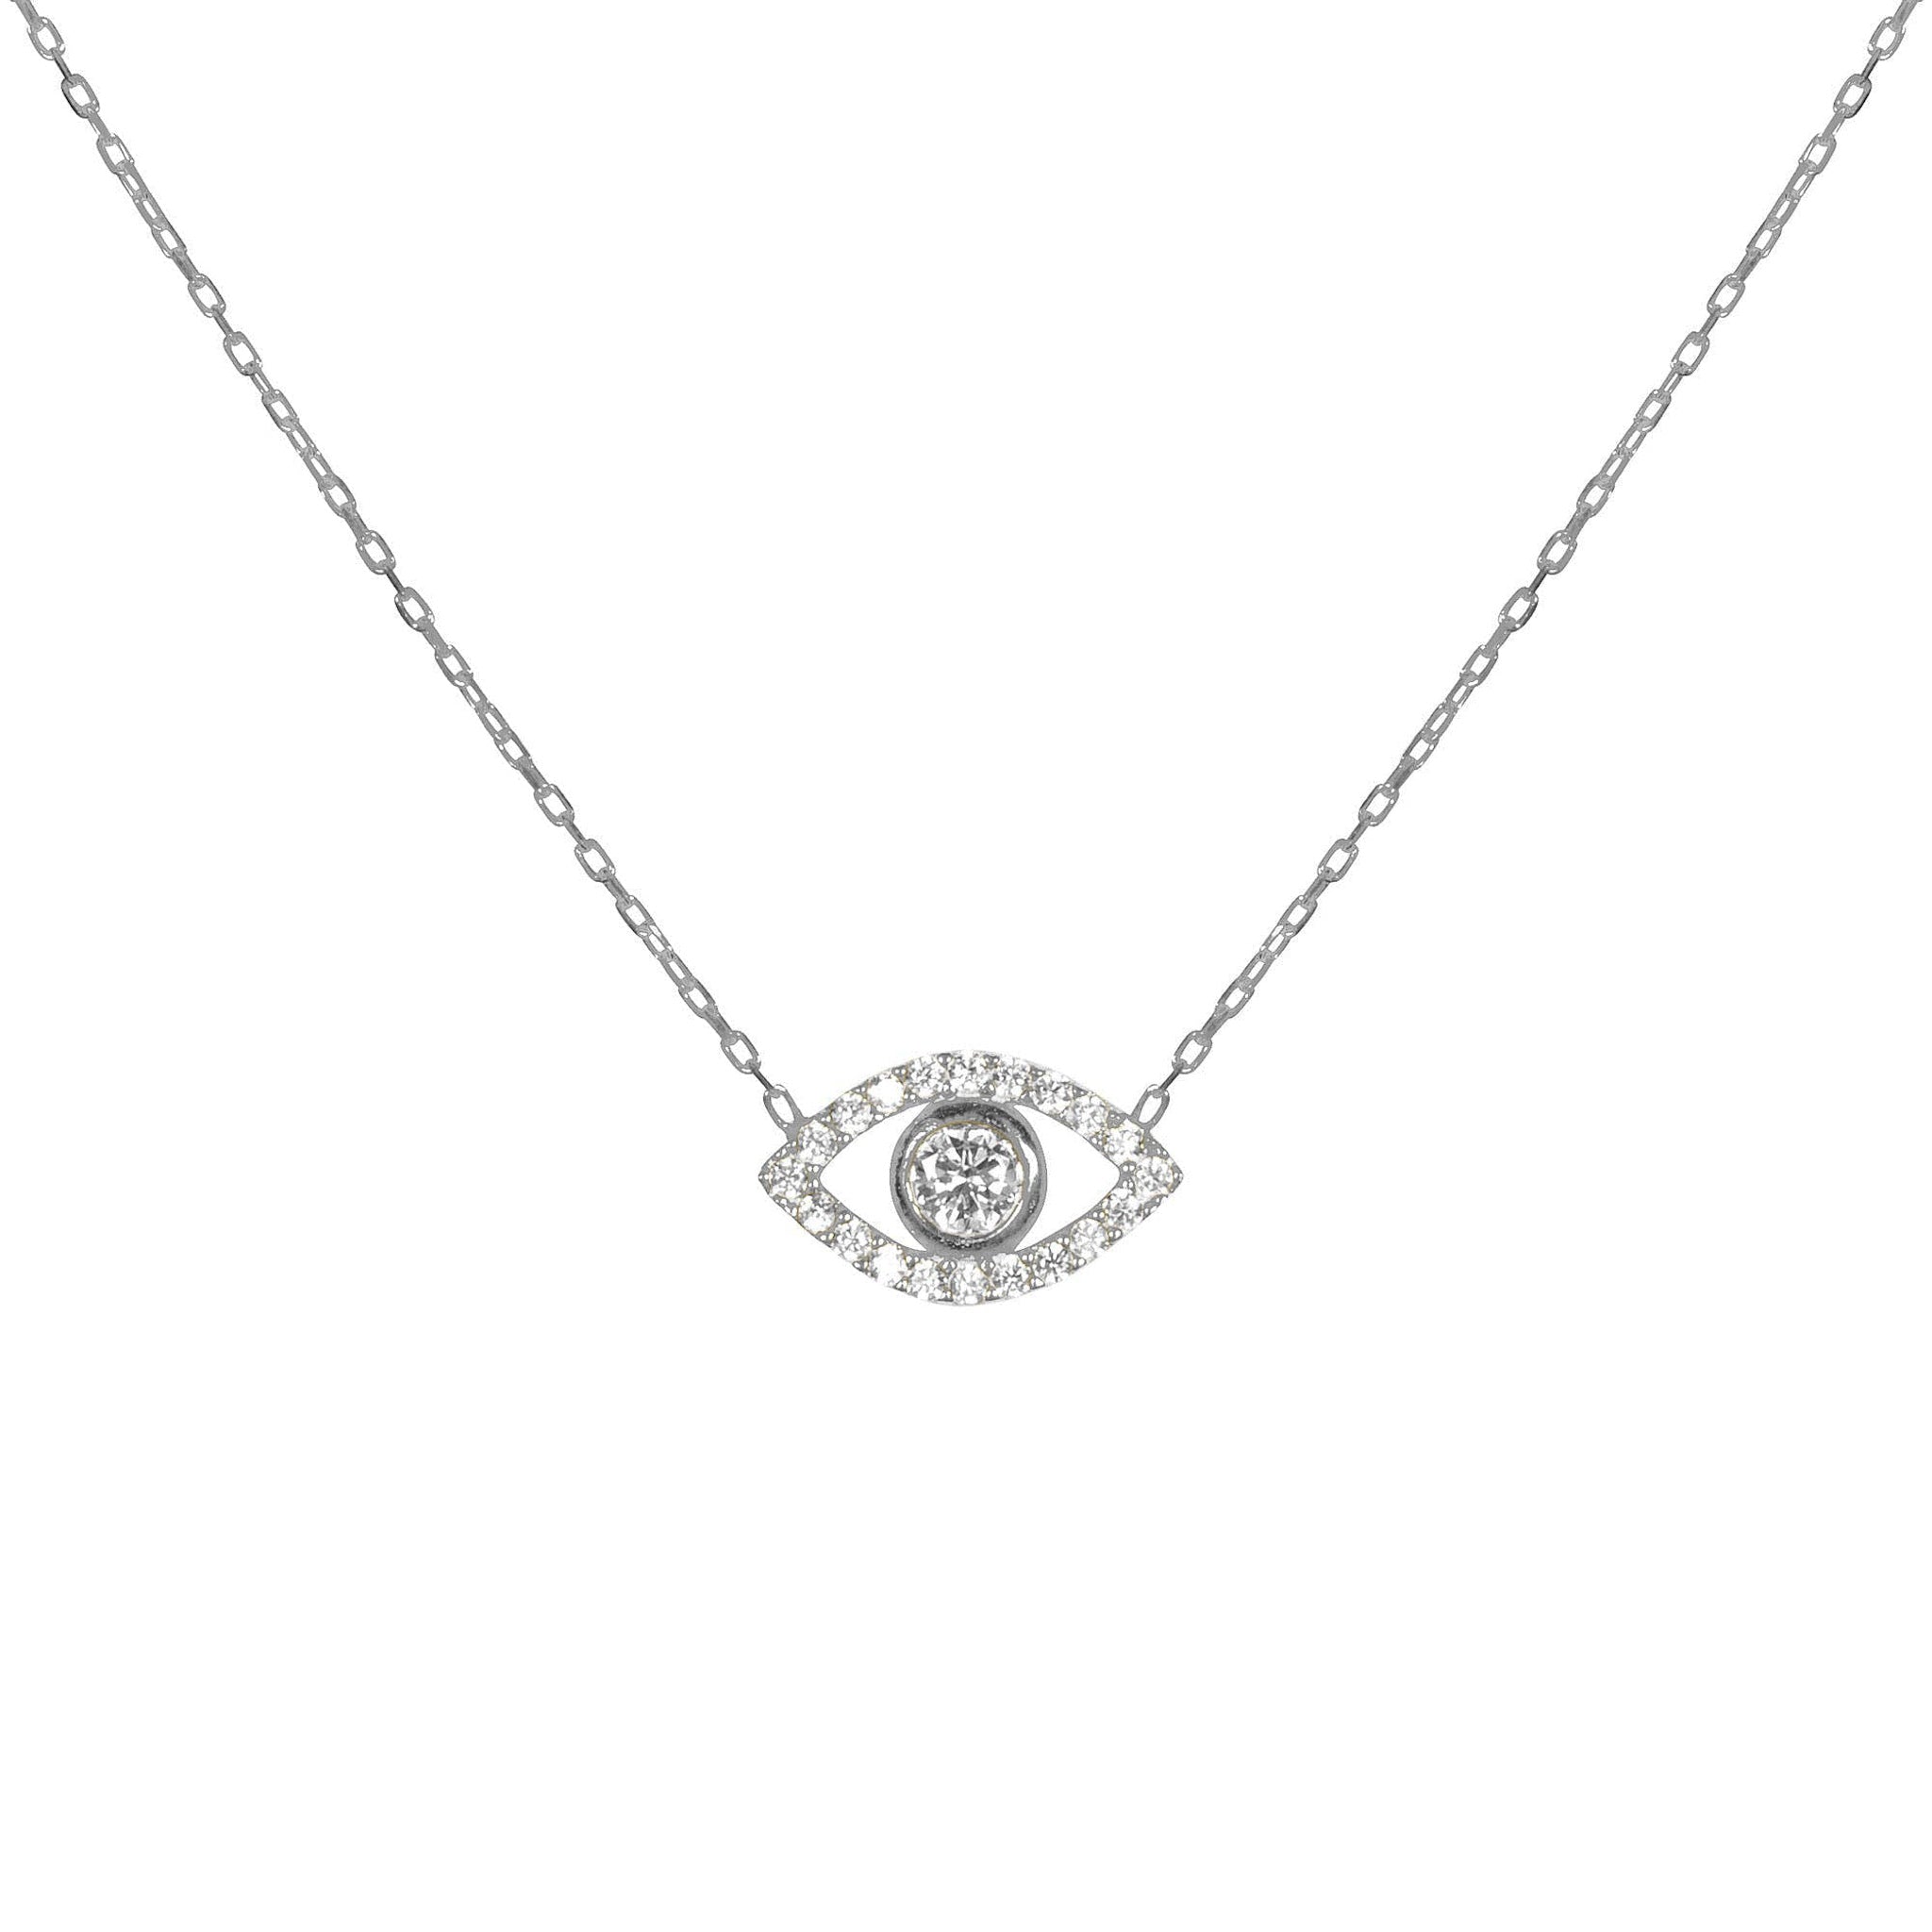 “Ojos” Sterling silver clear eye necklace